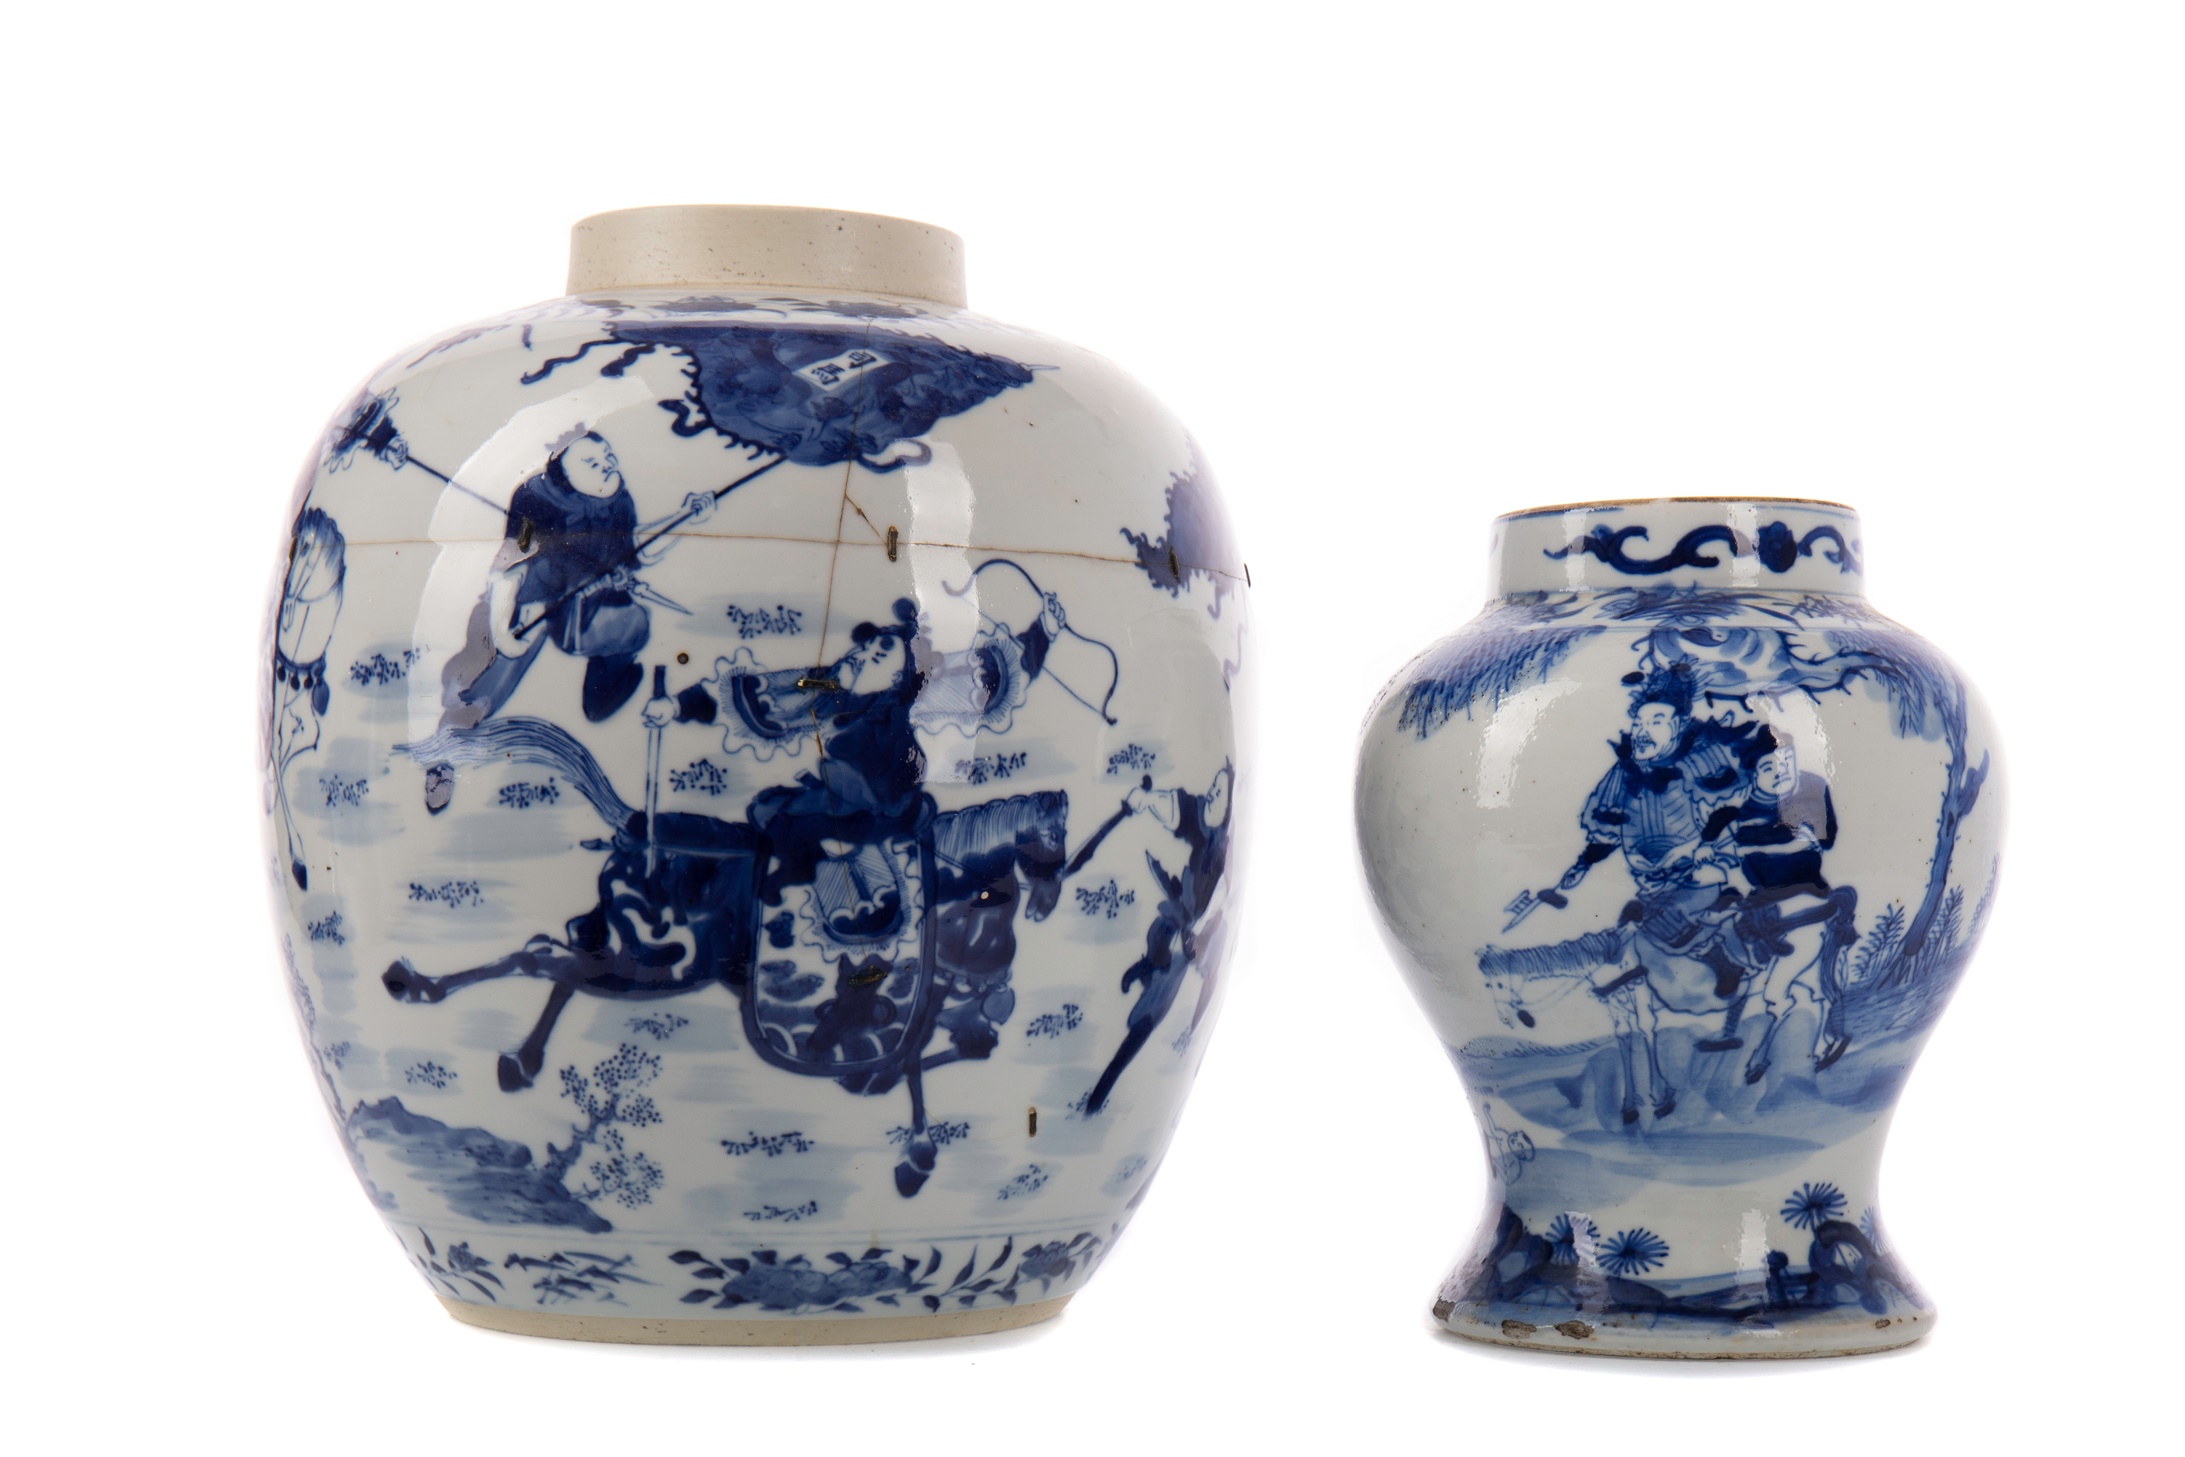 AN EARLY 19TH CENTURY CHINESE BLUE AND WHITE BALUSTER VASE AND ANOTHER